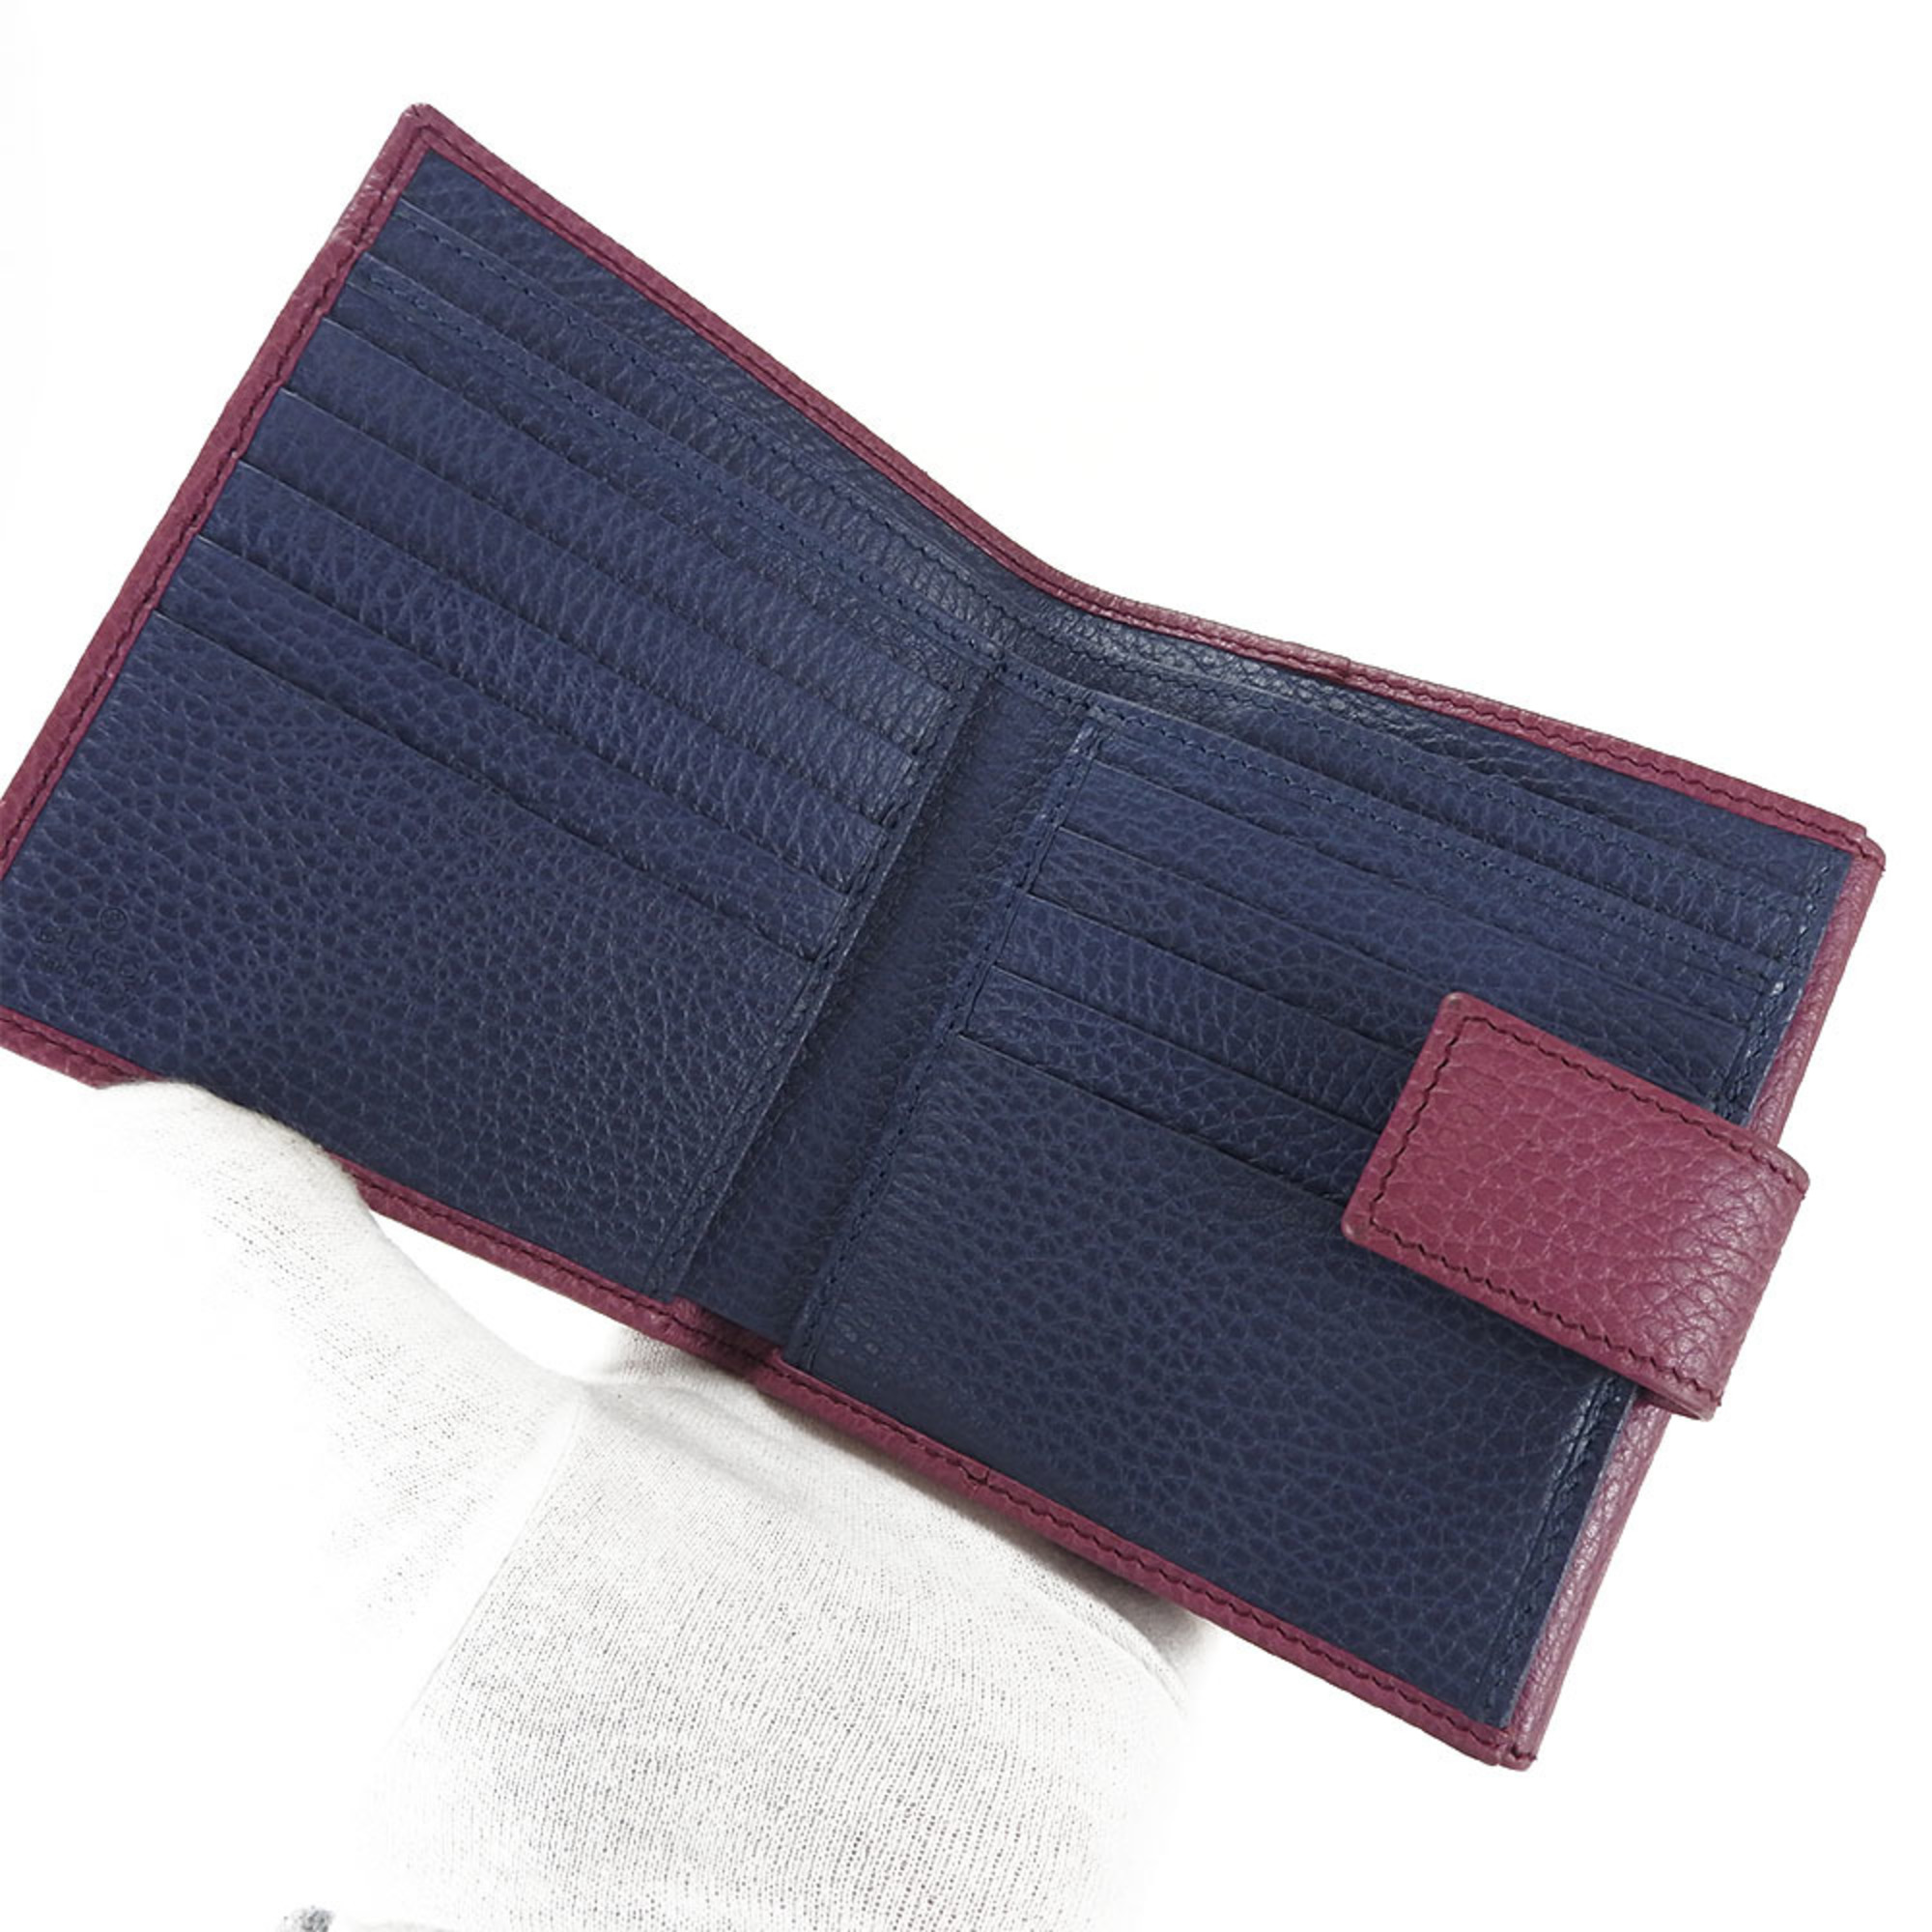 Gucci W wallet purple blue navy compact accessory ladies 368233 swing GUCCI leather